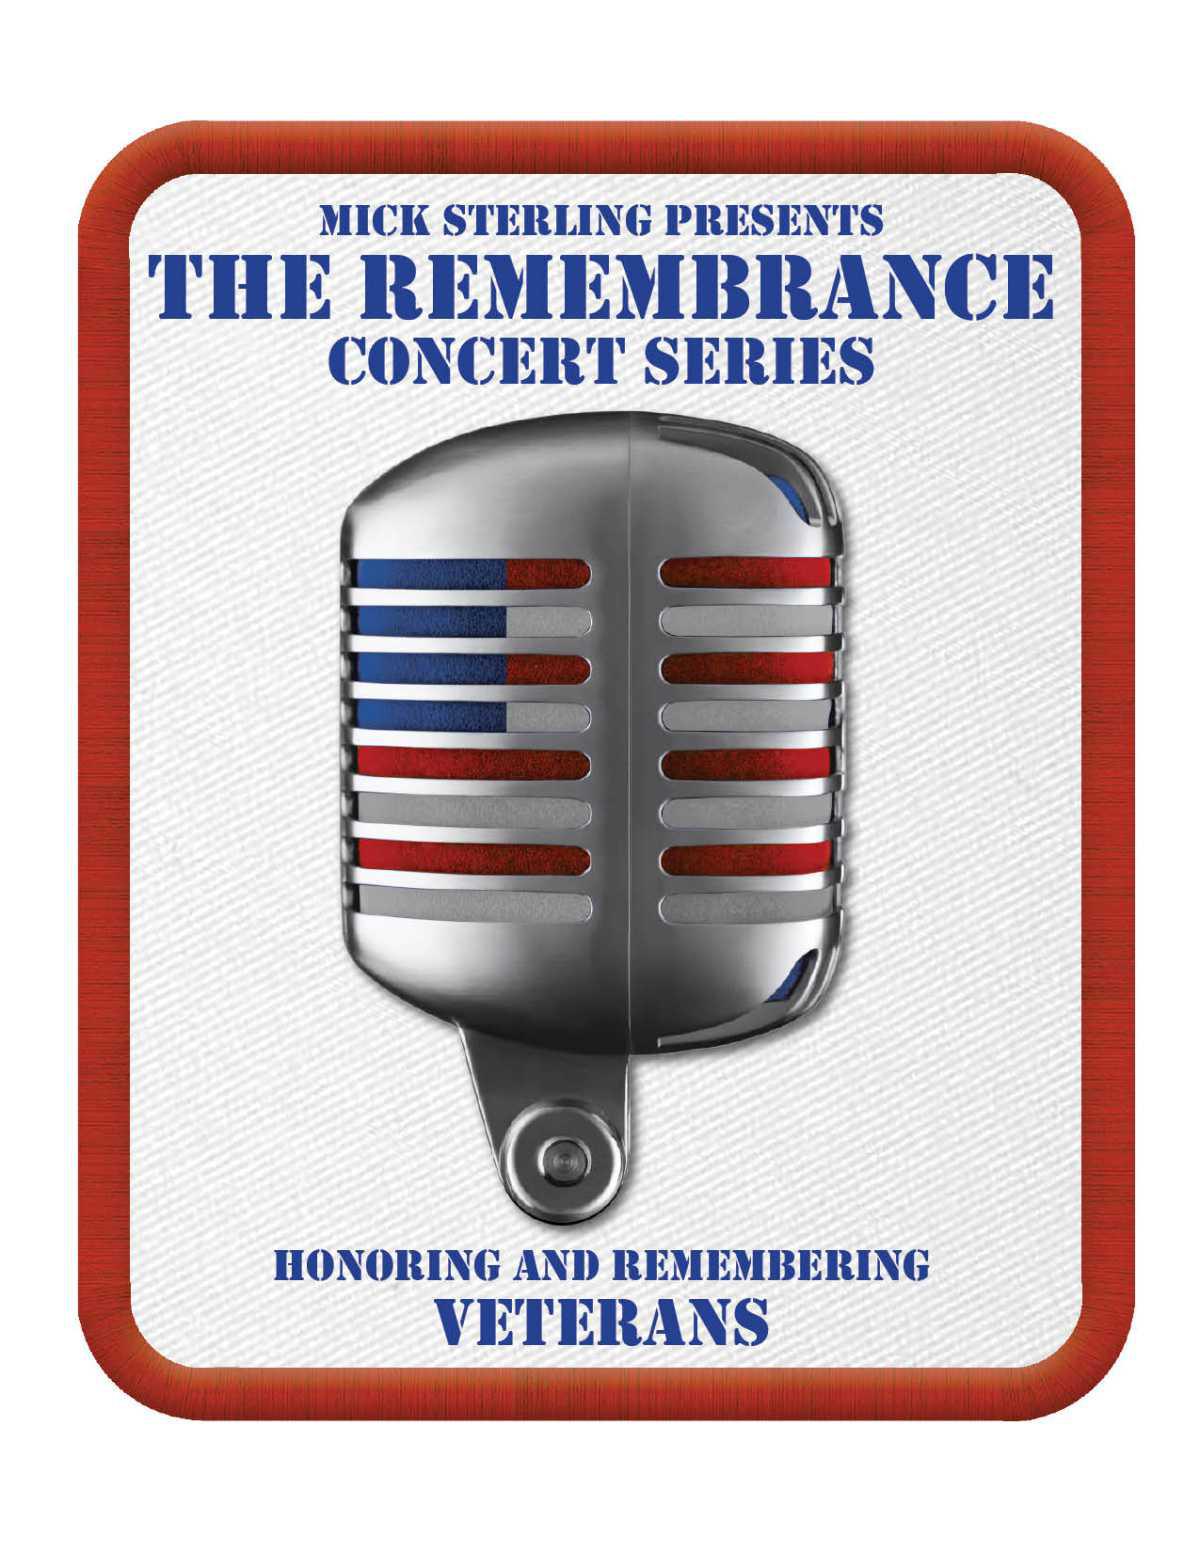 Mick Sterling Presents - The Remembrance Concert Series